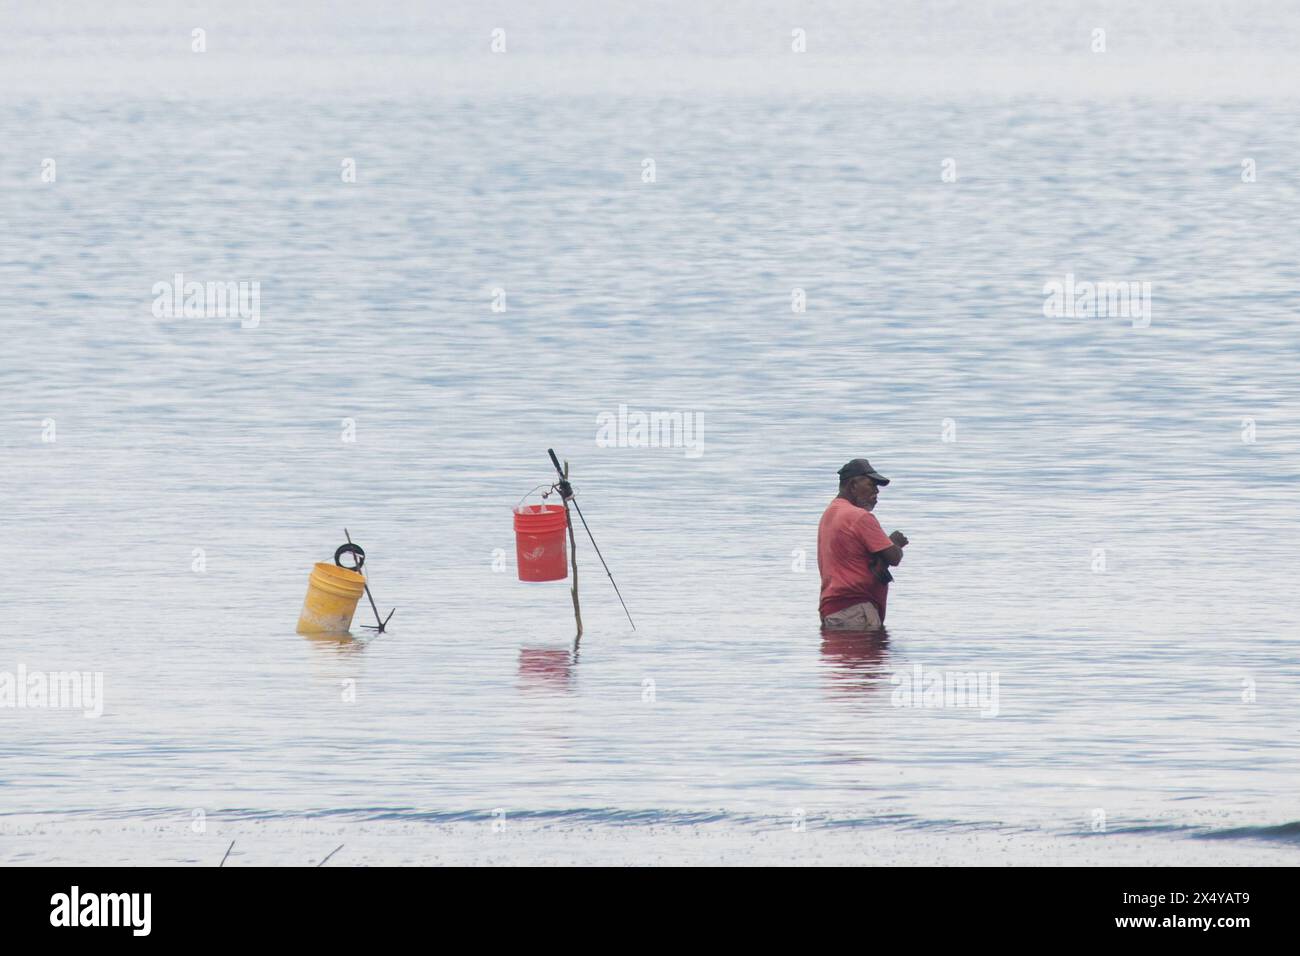 Subsistence or artisanal fishing is small scale marine harvest by individual fishermen, like this local man in Costa Rica catching fish in Golfo Dulce. Stock Photo